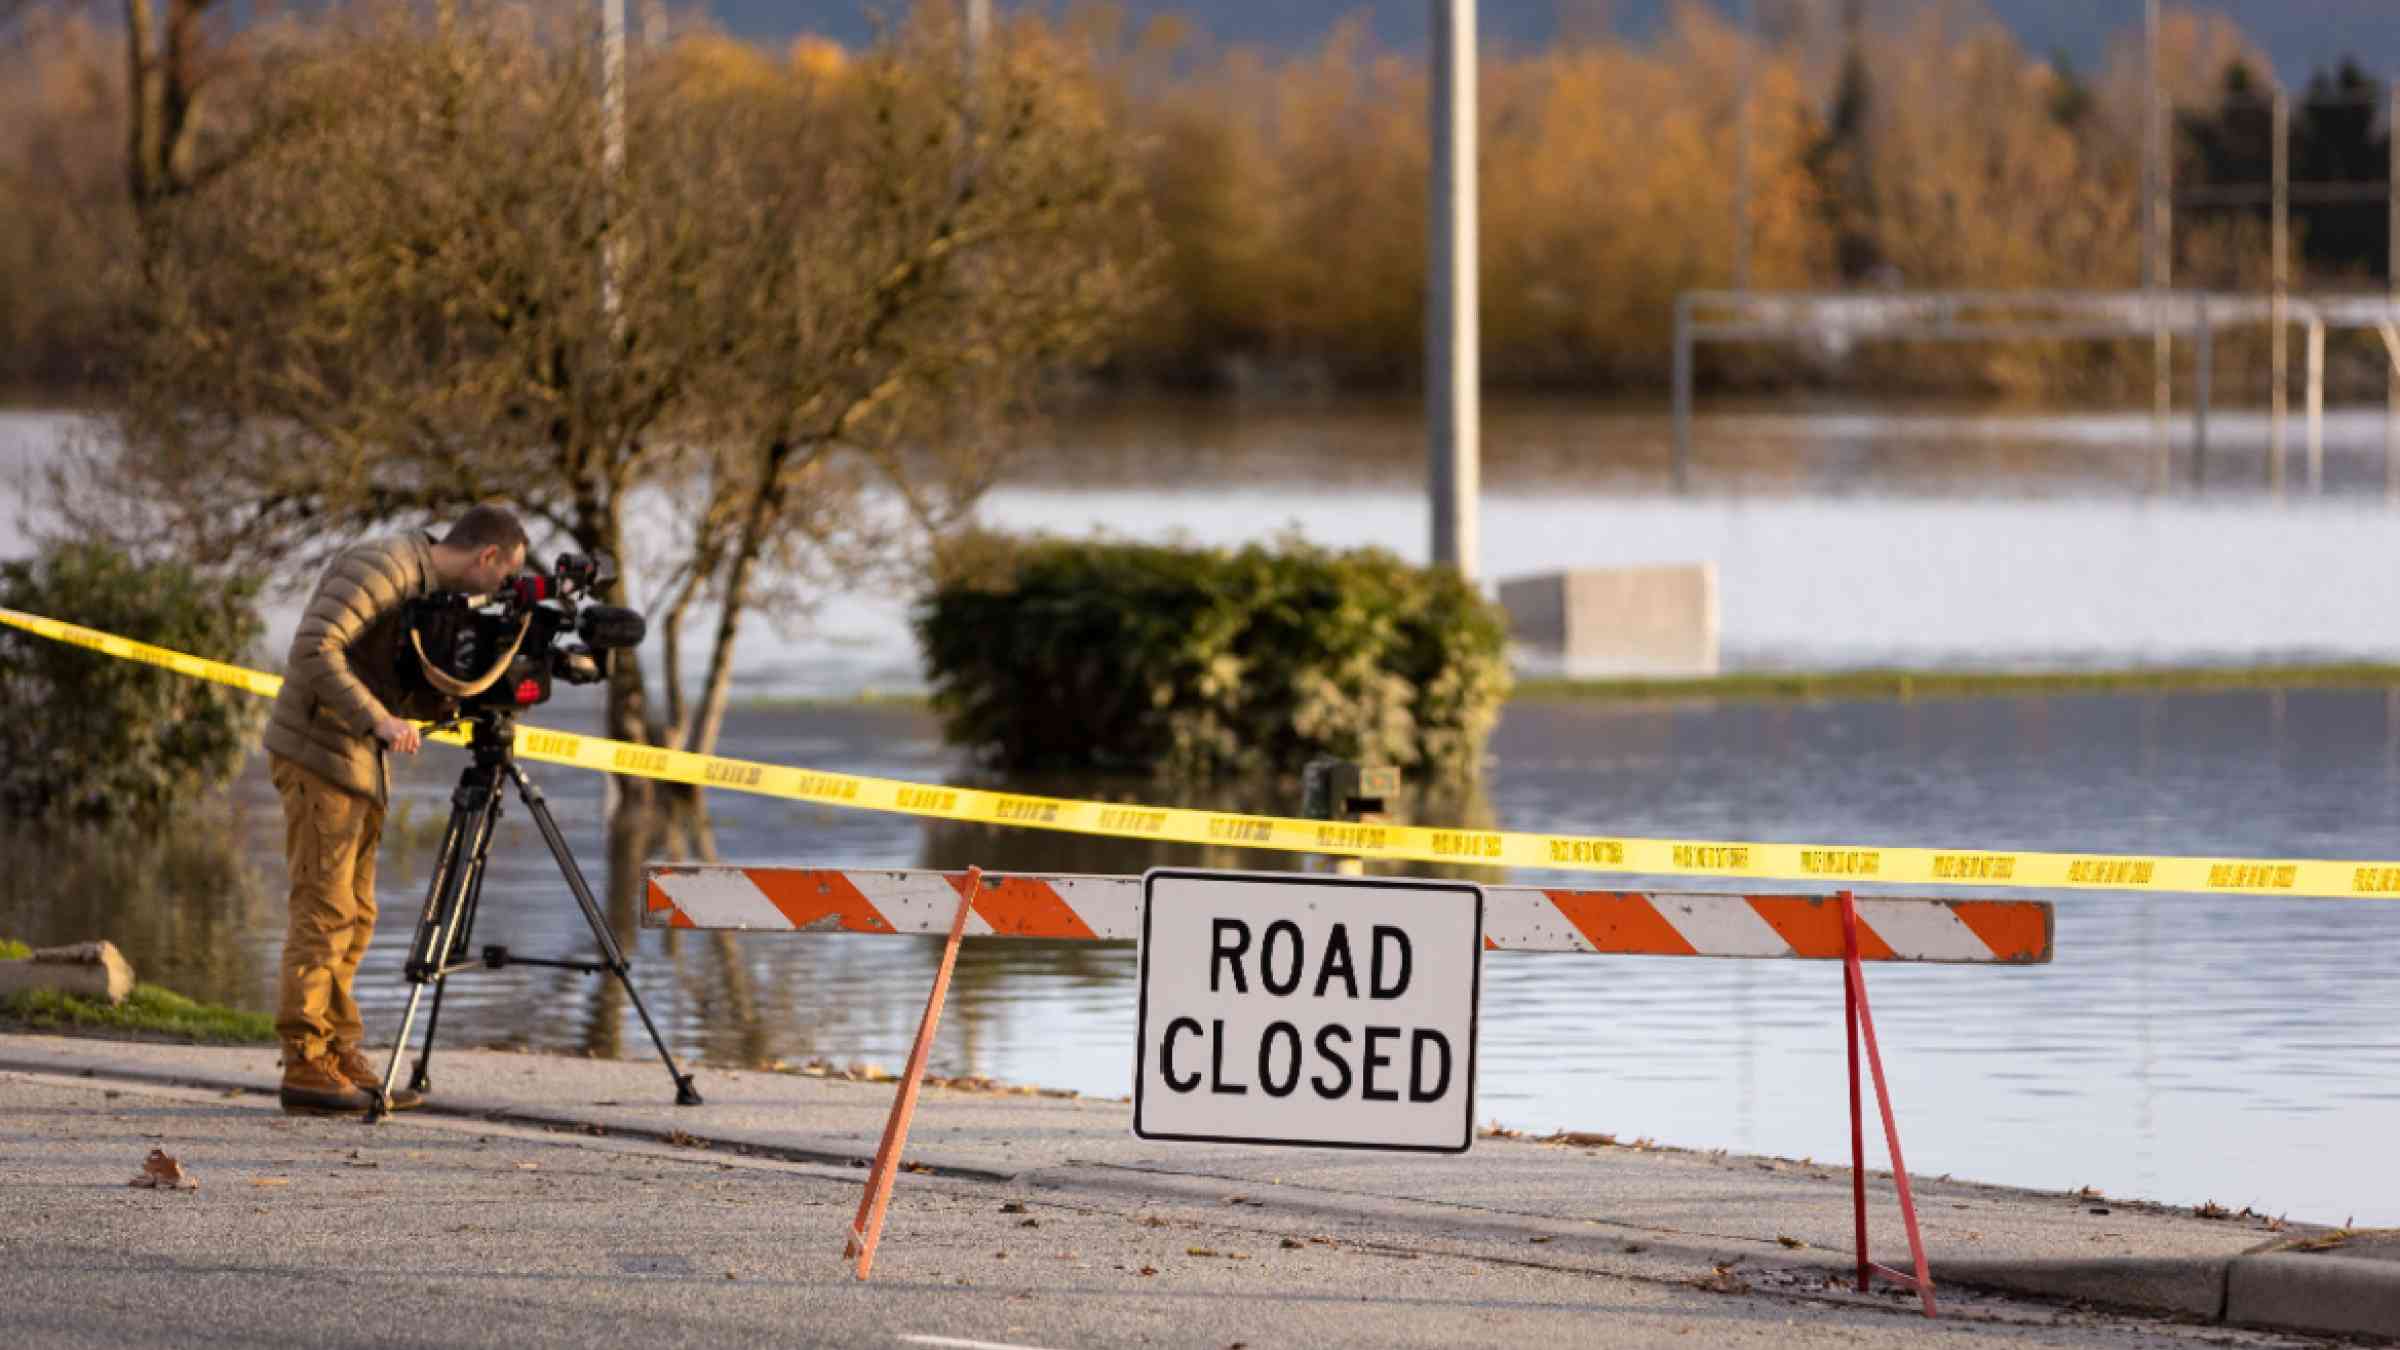 Journalist filming floods near a closed road signs due to infrastructure damage caused by heavy rain in the Fraser Valley, Canada in 2021